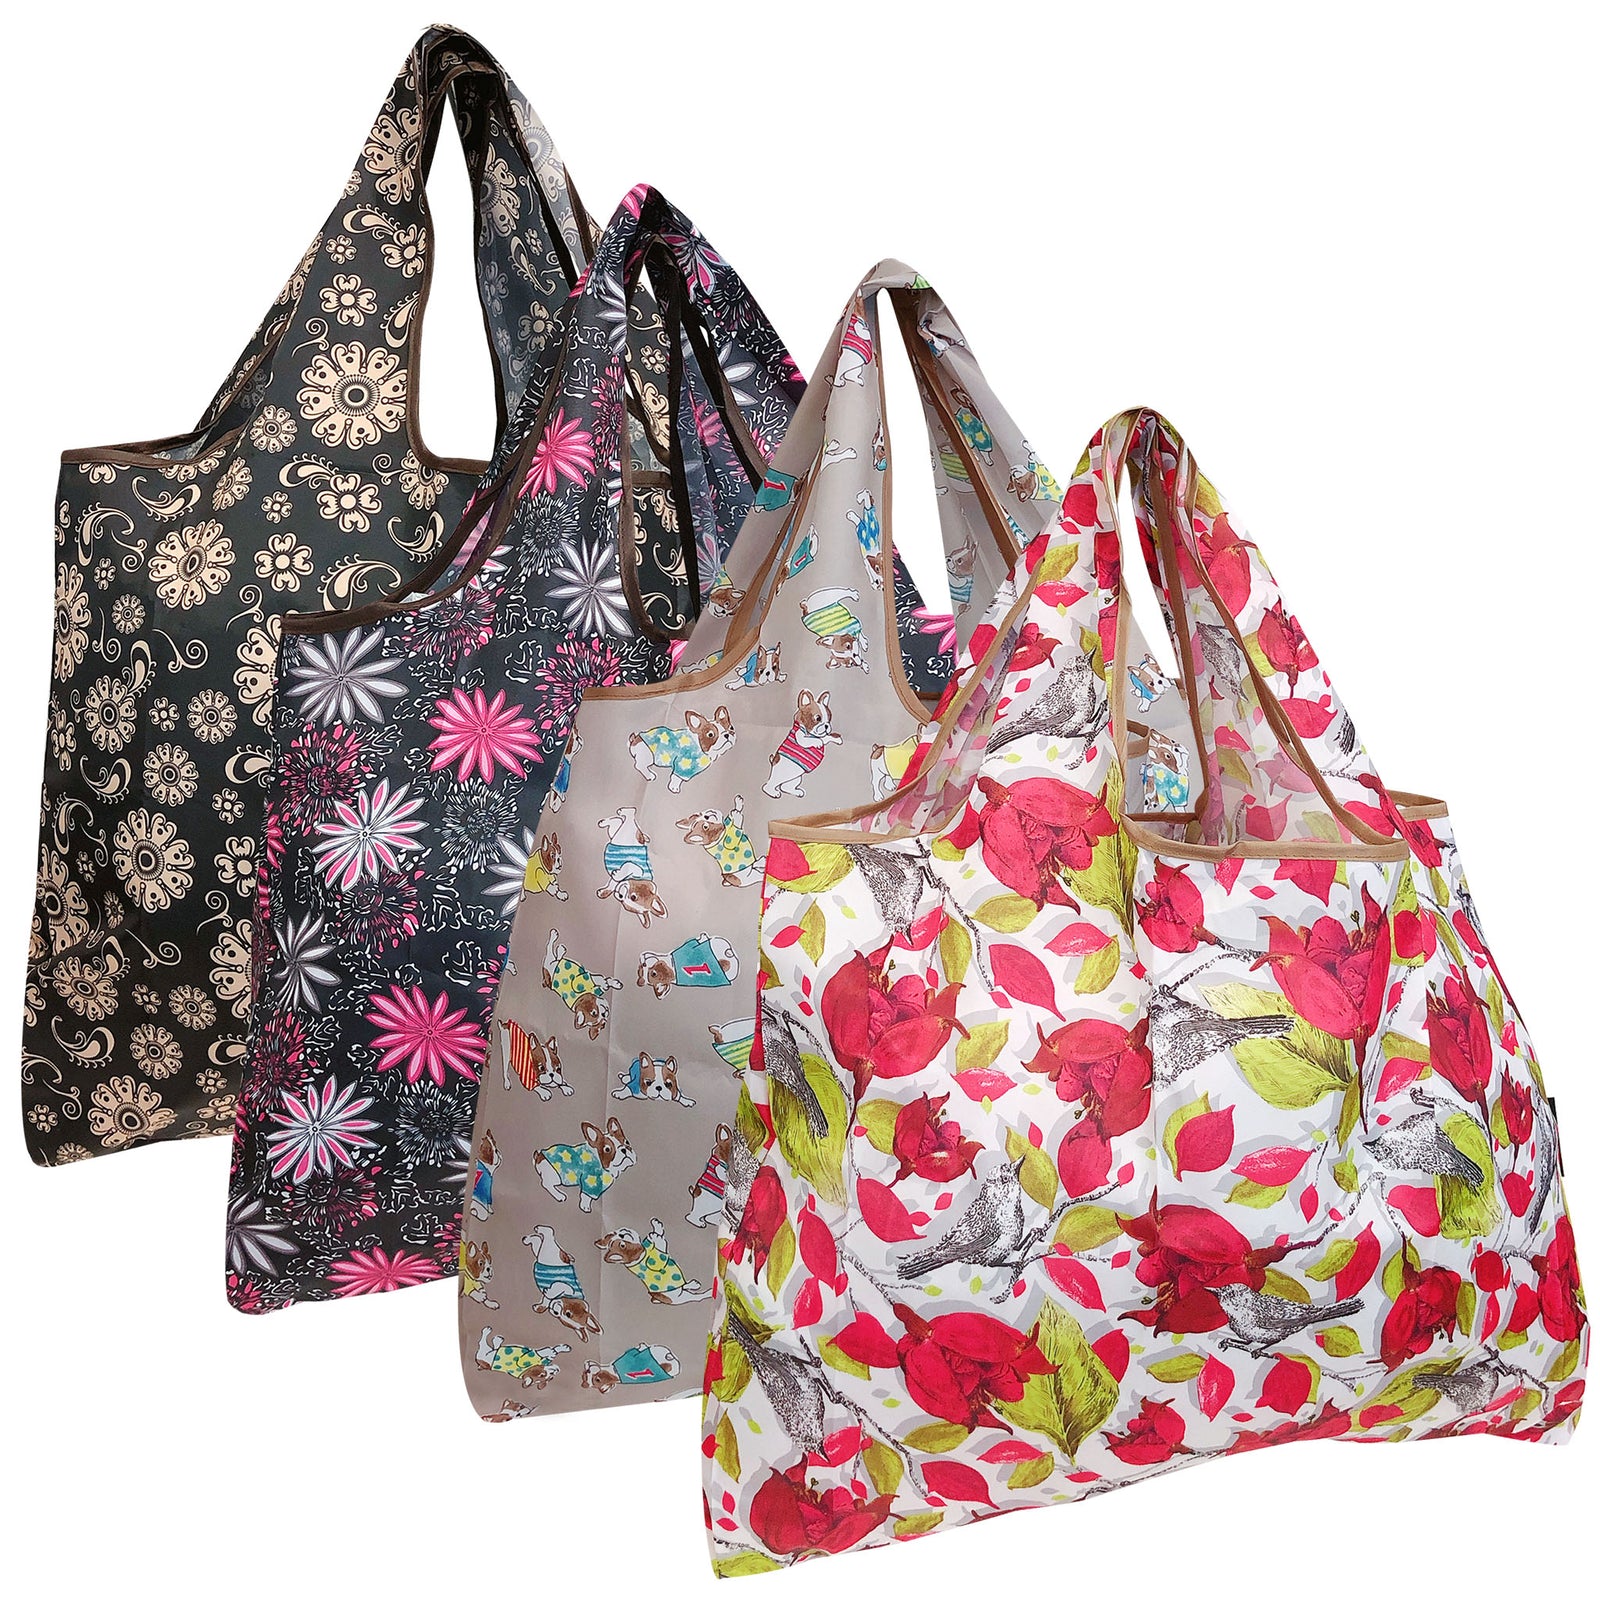 Wrapables Large Foldable Tote Nylon Reusable Grocery Bags, 4 Pack